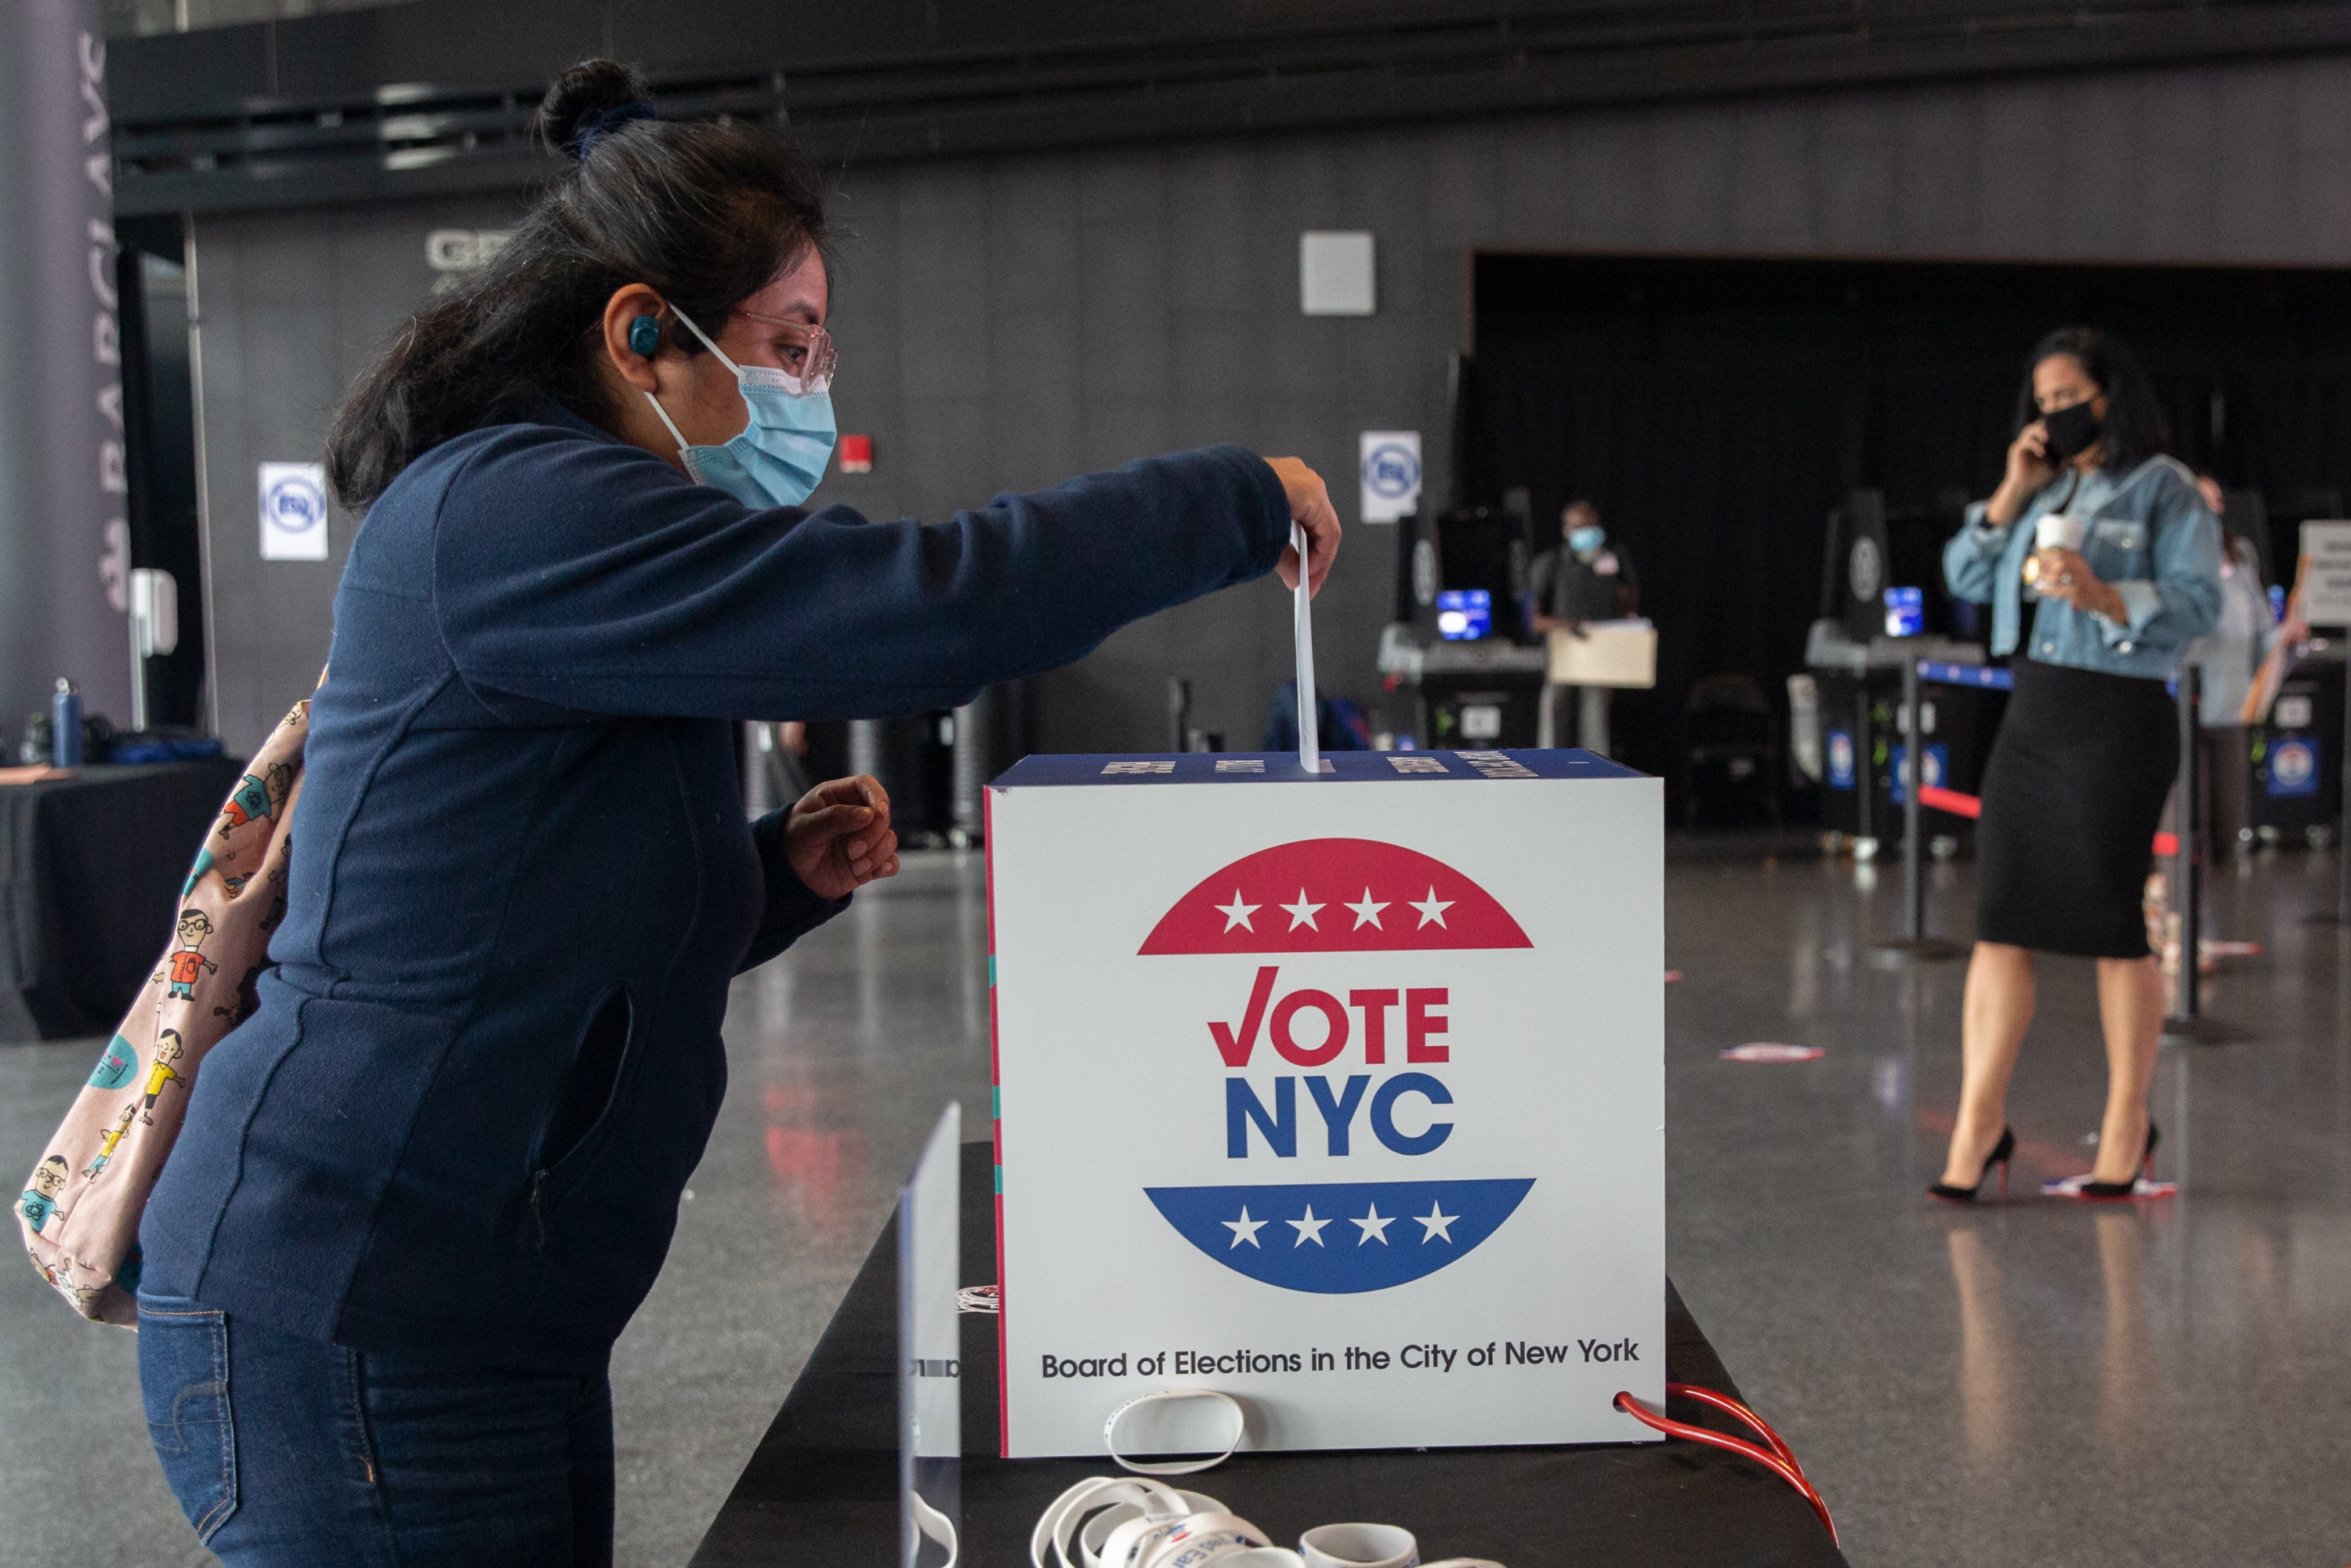 A Brooklyn resident drops off an absentee ballot at the Barclays Center on the first day of early voting, Oct. 24, 2020.